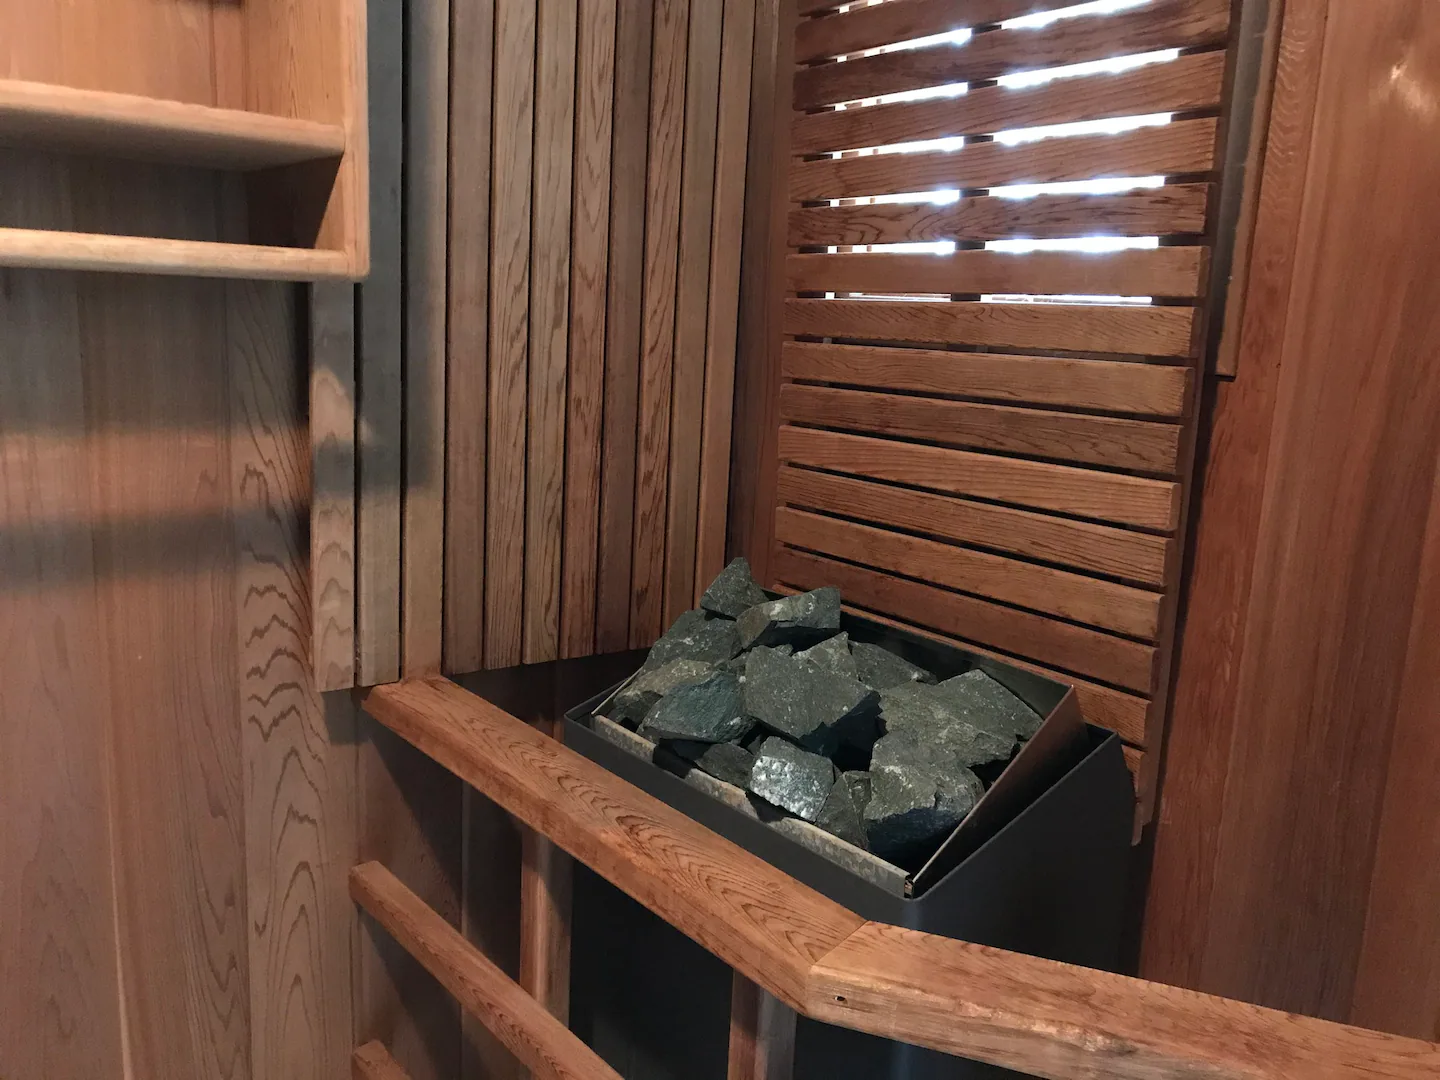 Relax in your own private Hot Sauna!